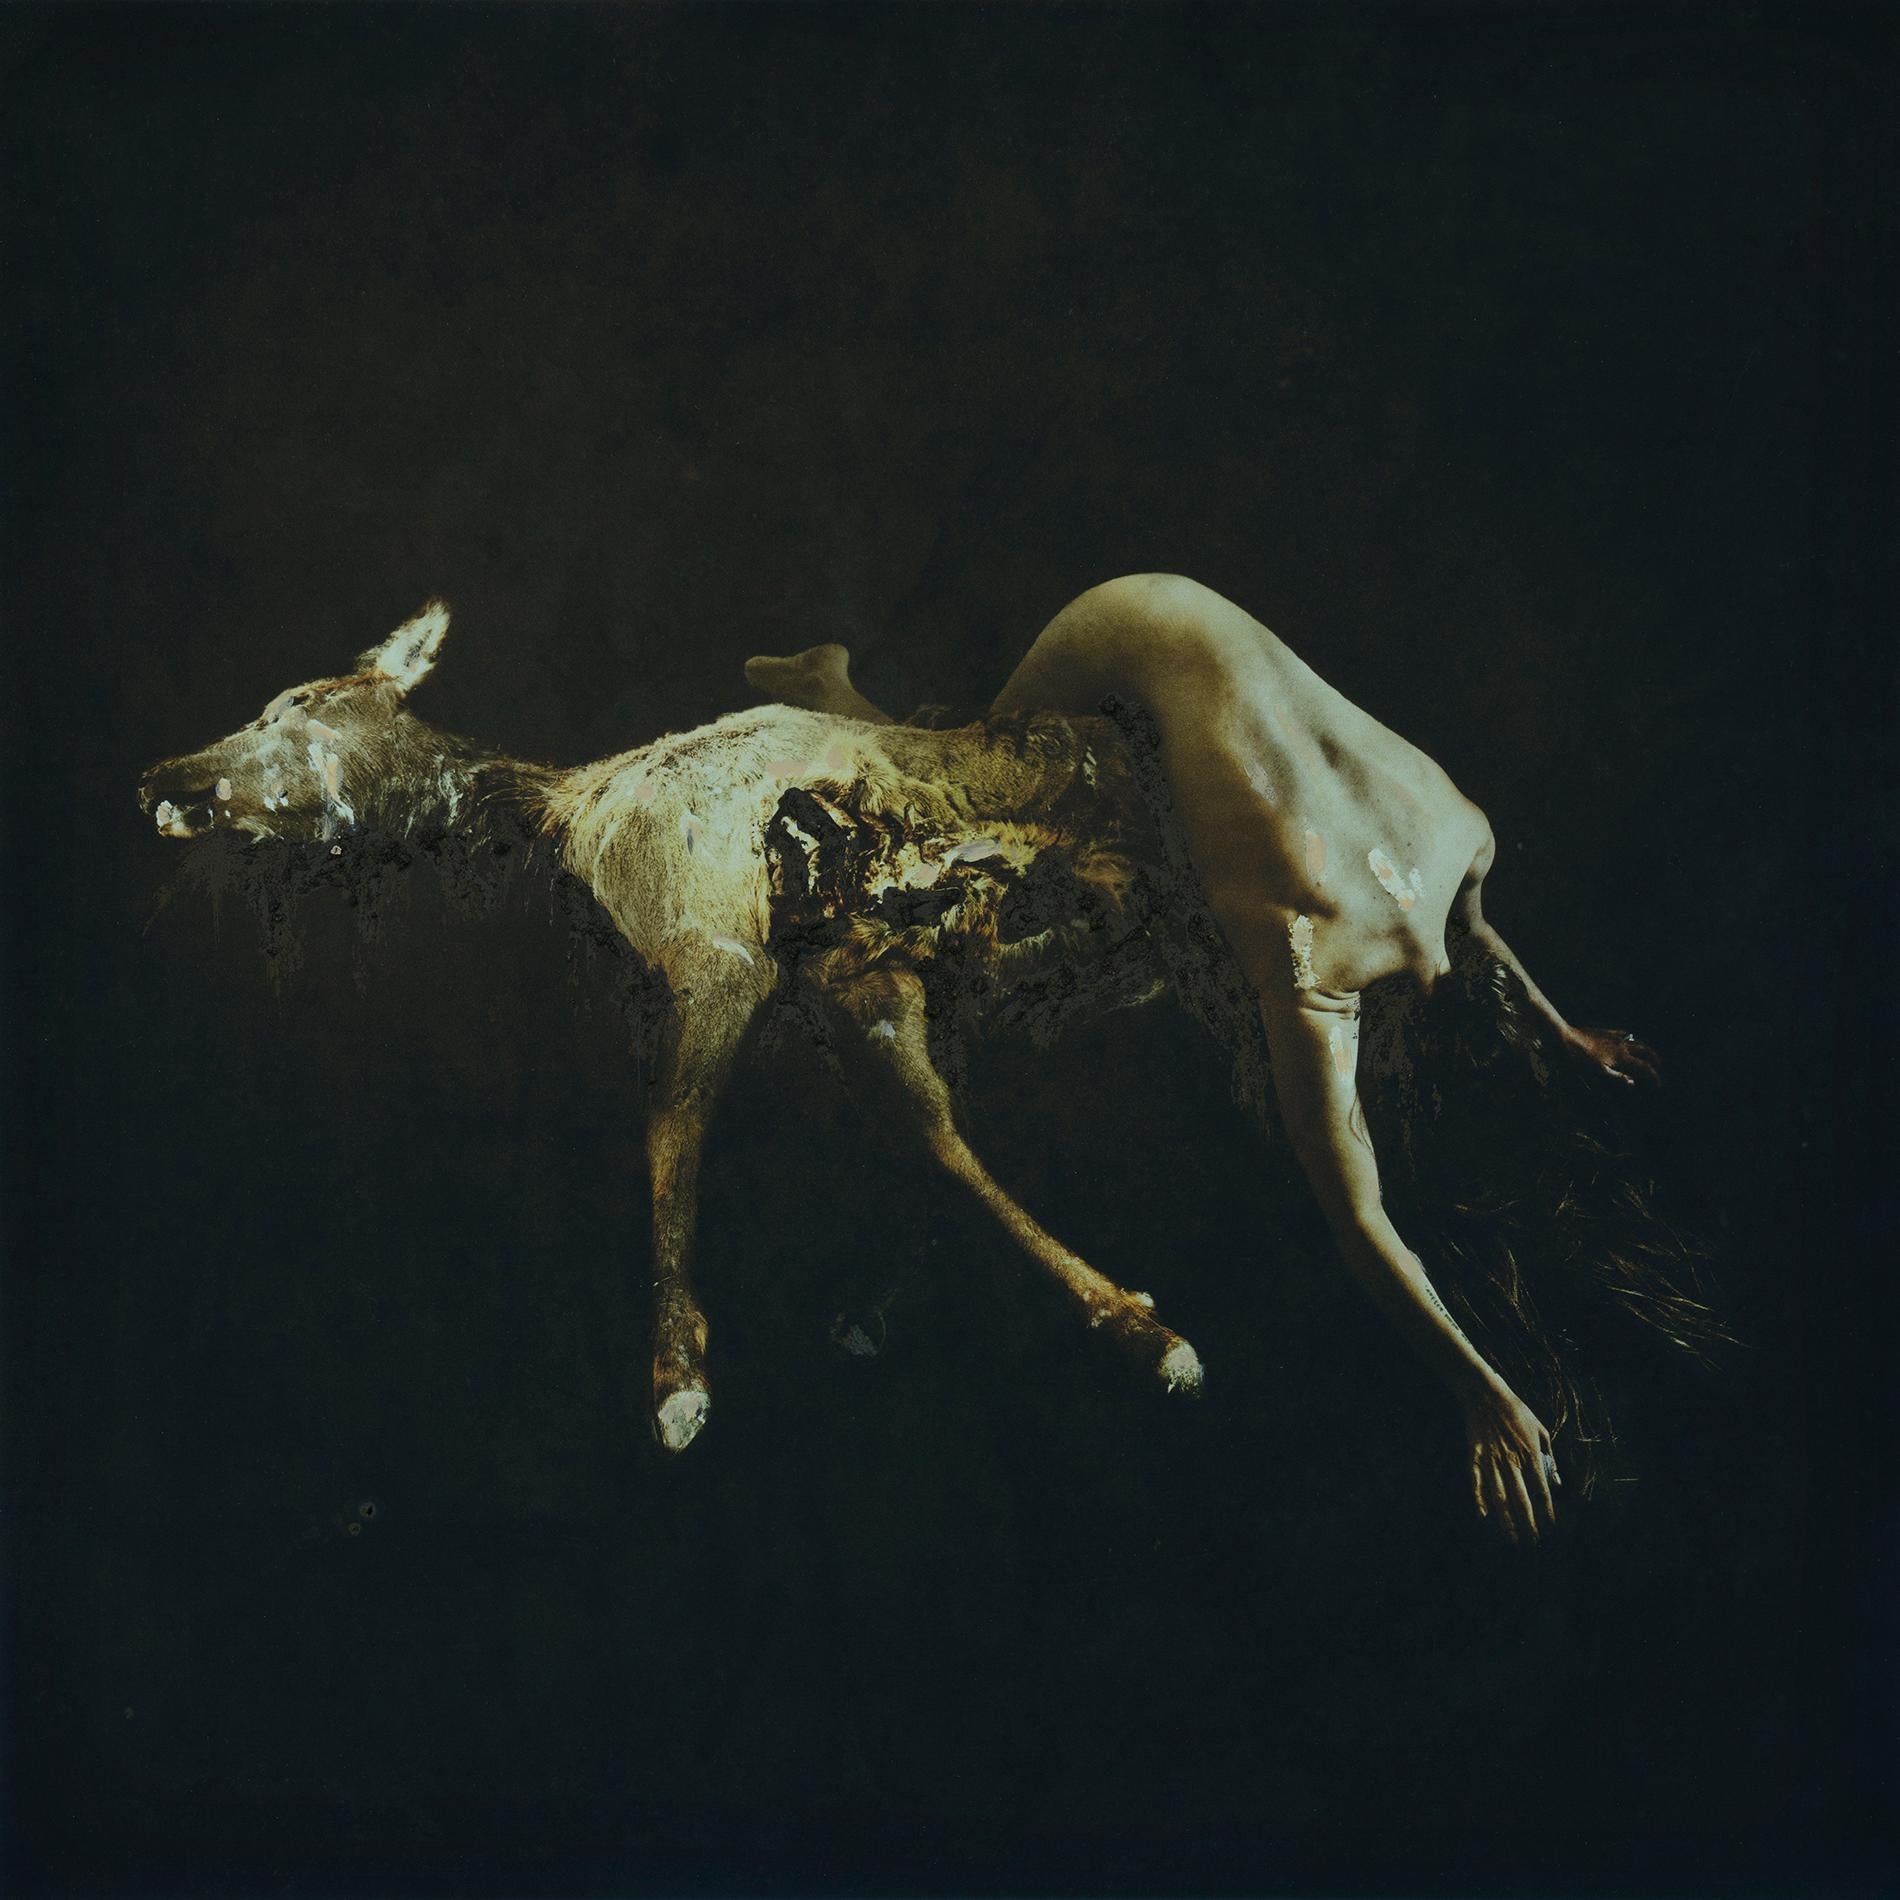 BROOKE SHADEN
"Integration"
Photo on Velvet Fine Art Paper, Ed of 2
15 × 15 in. Unframed
*Please allow 2 weeks printing lead time*


"The twisted body of the subject lays in place over the mutilated elk remains in an attempt to complete the body of